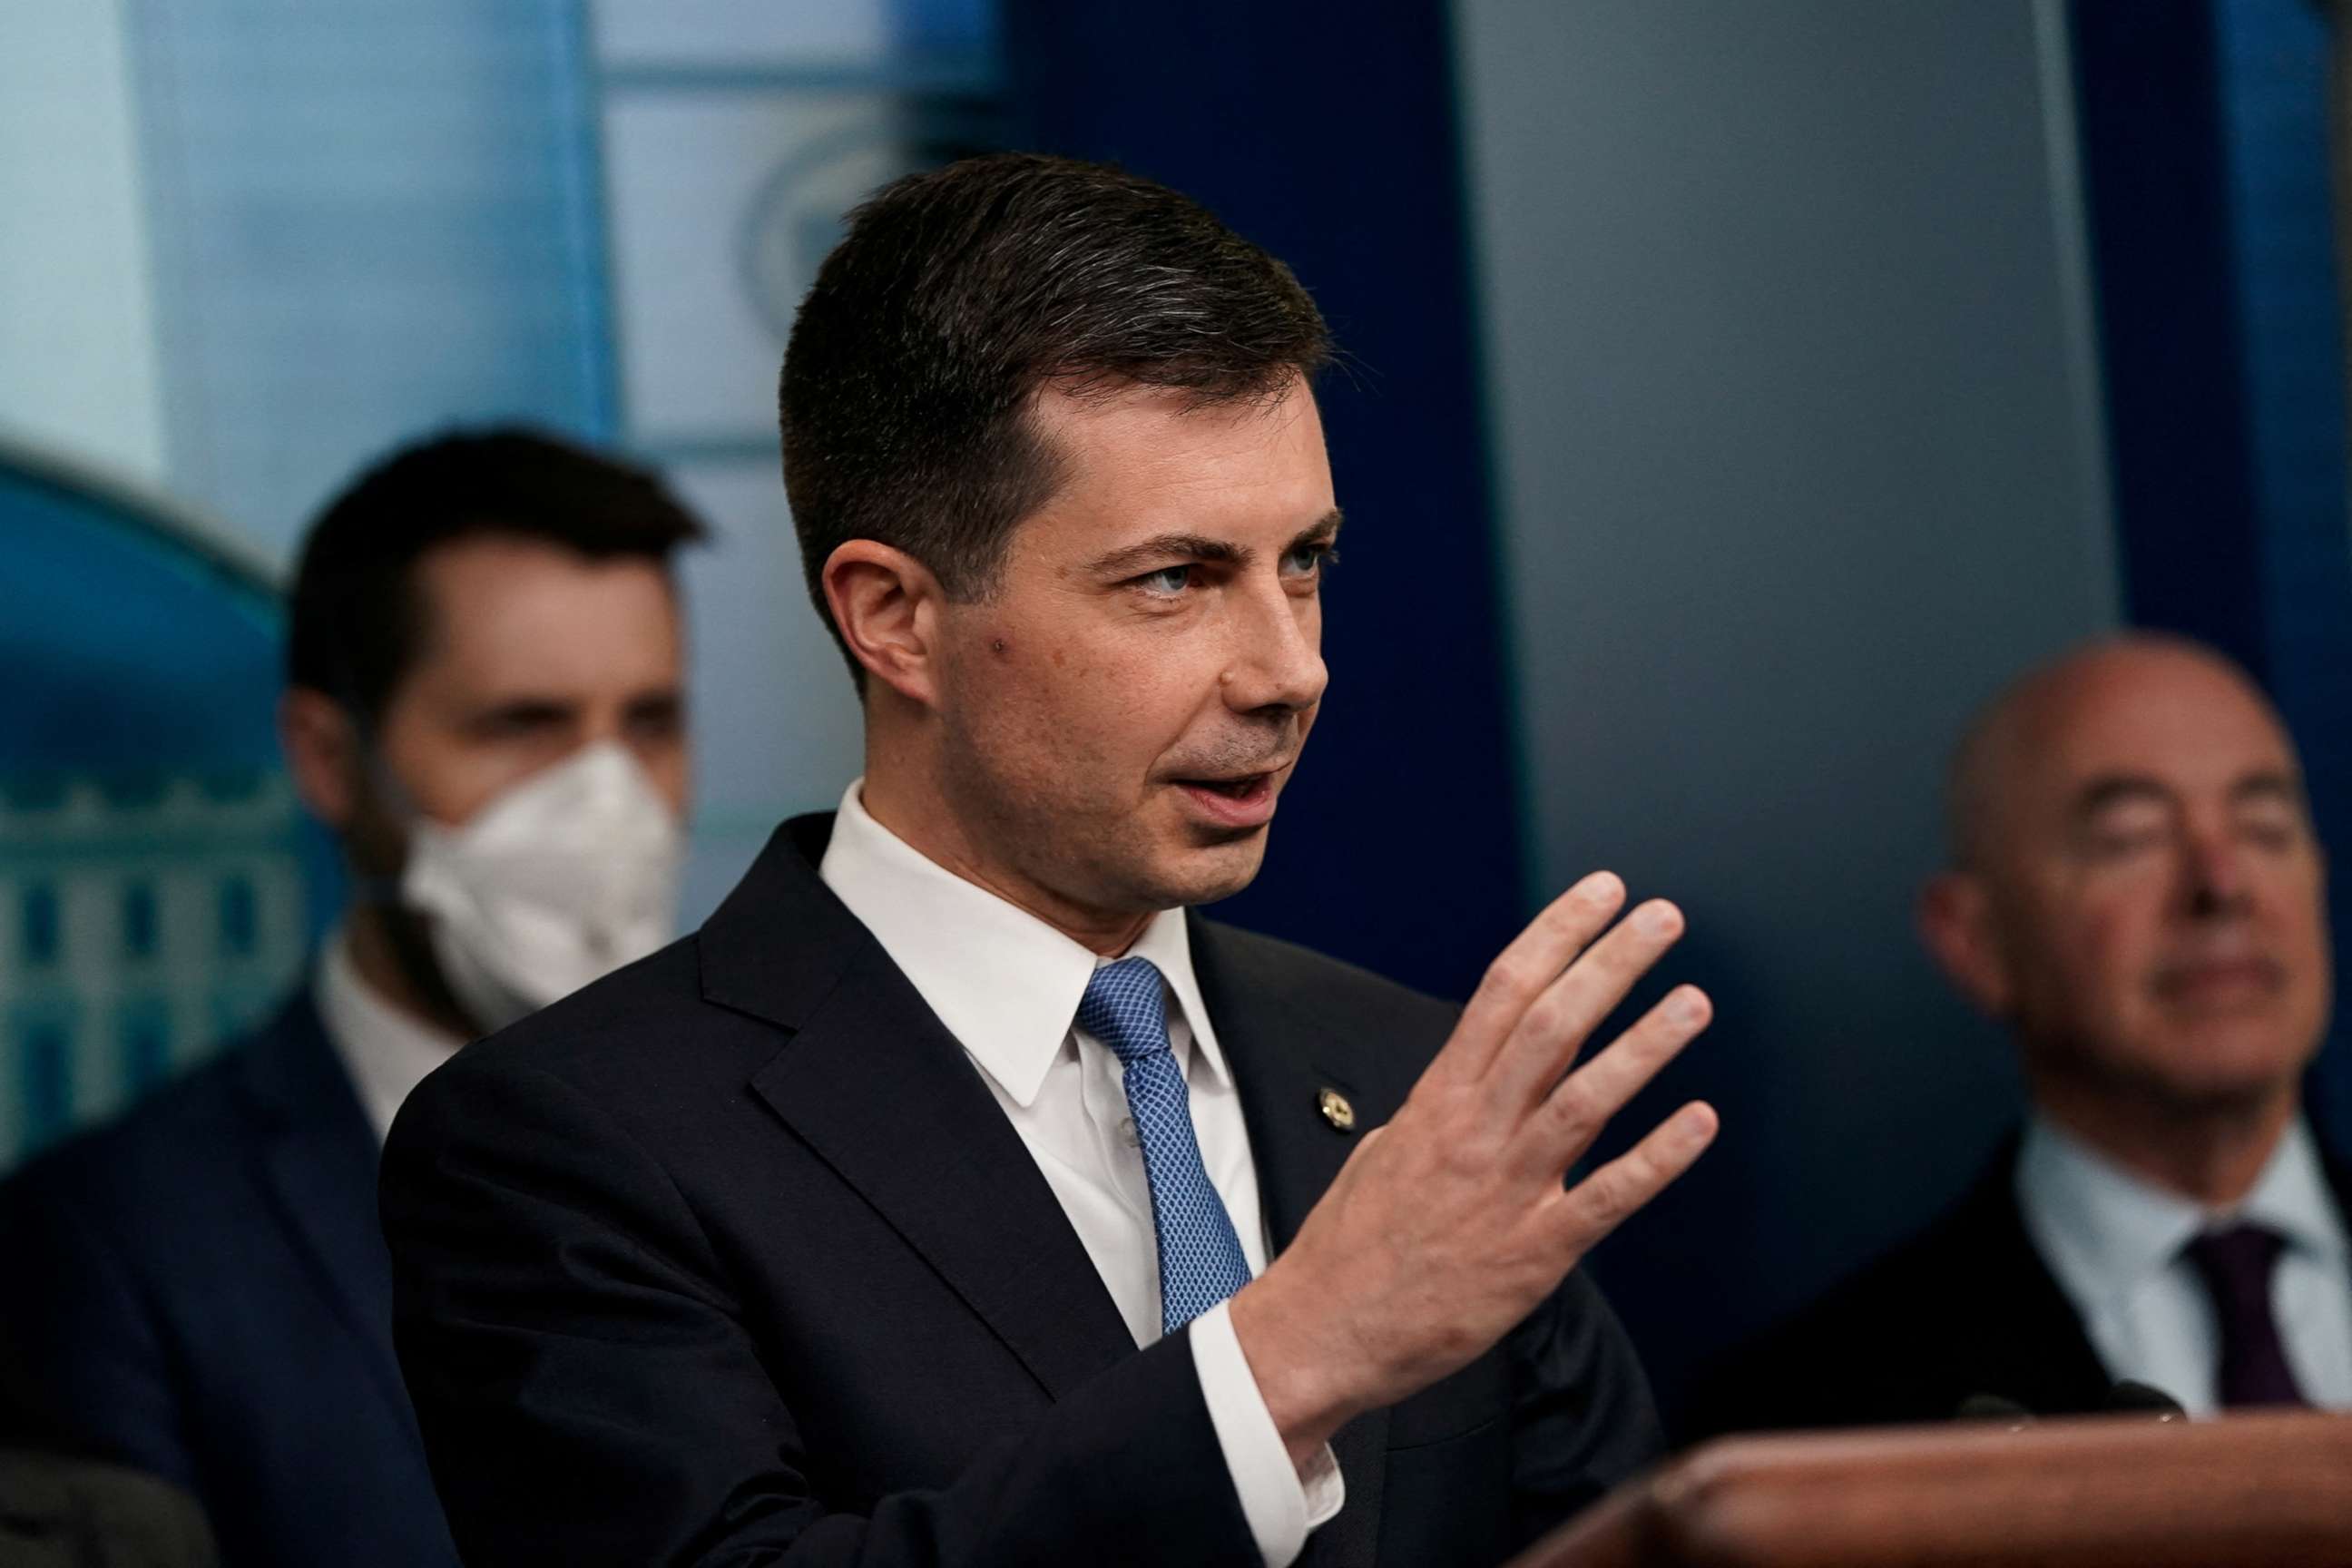 PHOTO: In this May 16, 2022, file photo, Secretary of the Transportation Pete Buttigieg speaks during a briefing about the bipartisan infrastructure law at the White House in Washington, D.C.